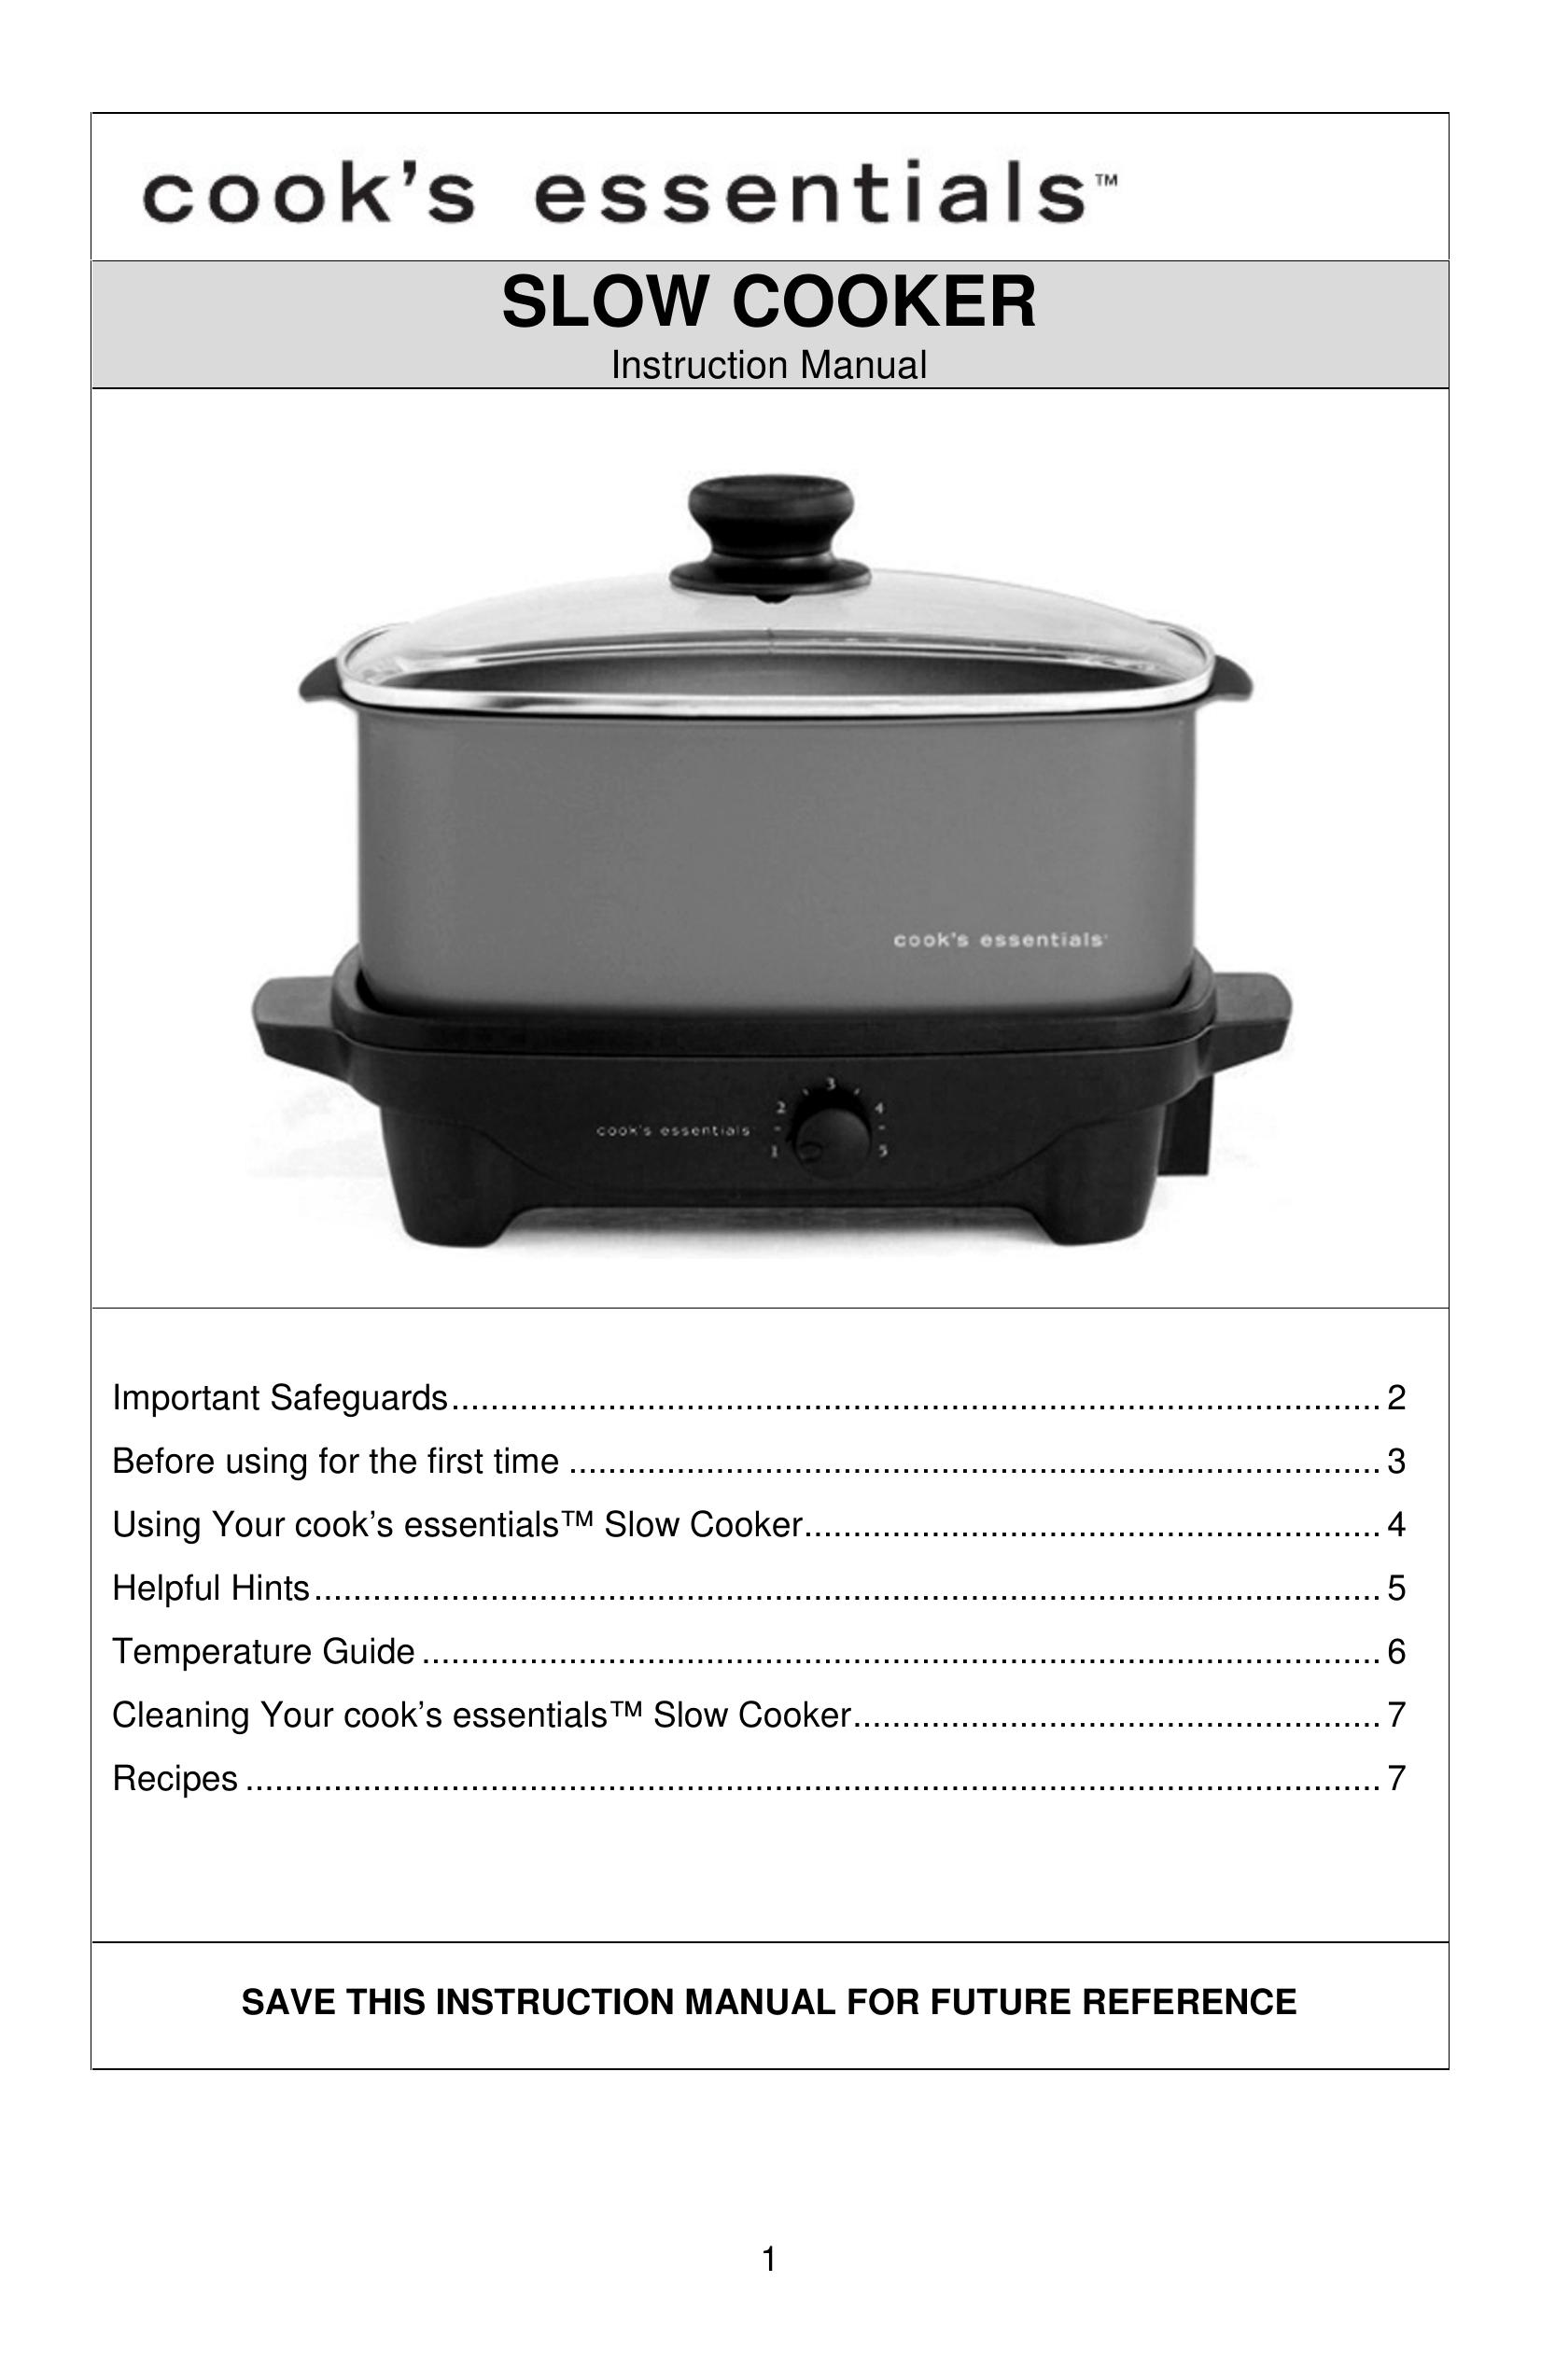 West Bend L5803A Slow Cooker User Manual